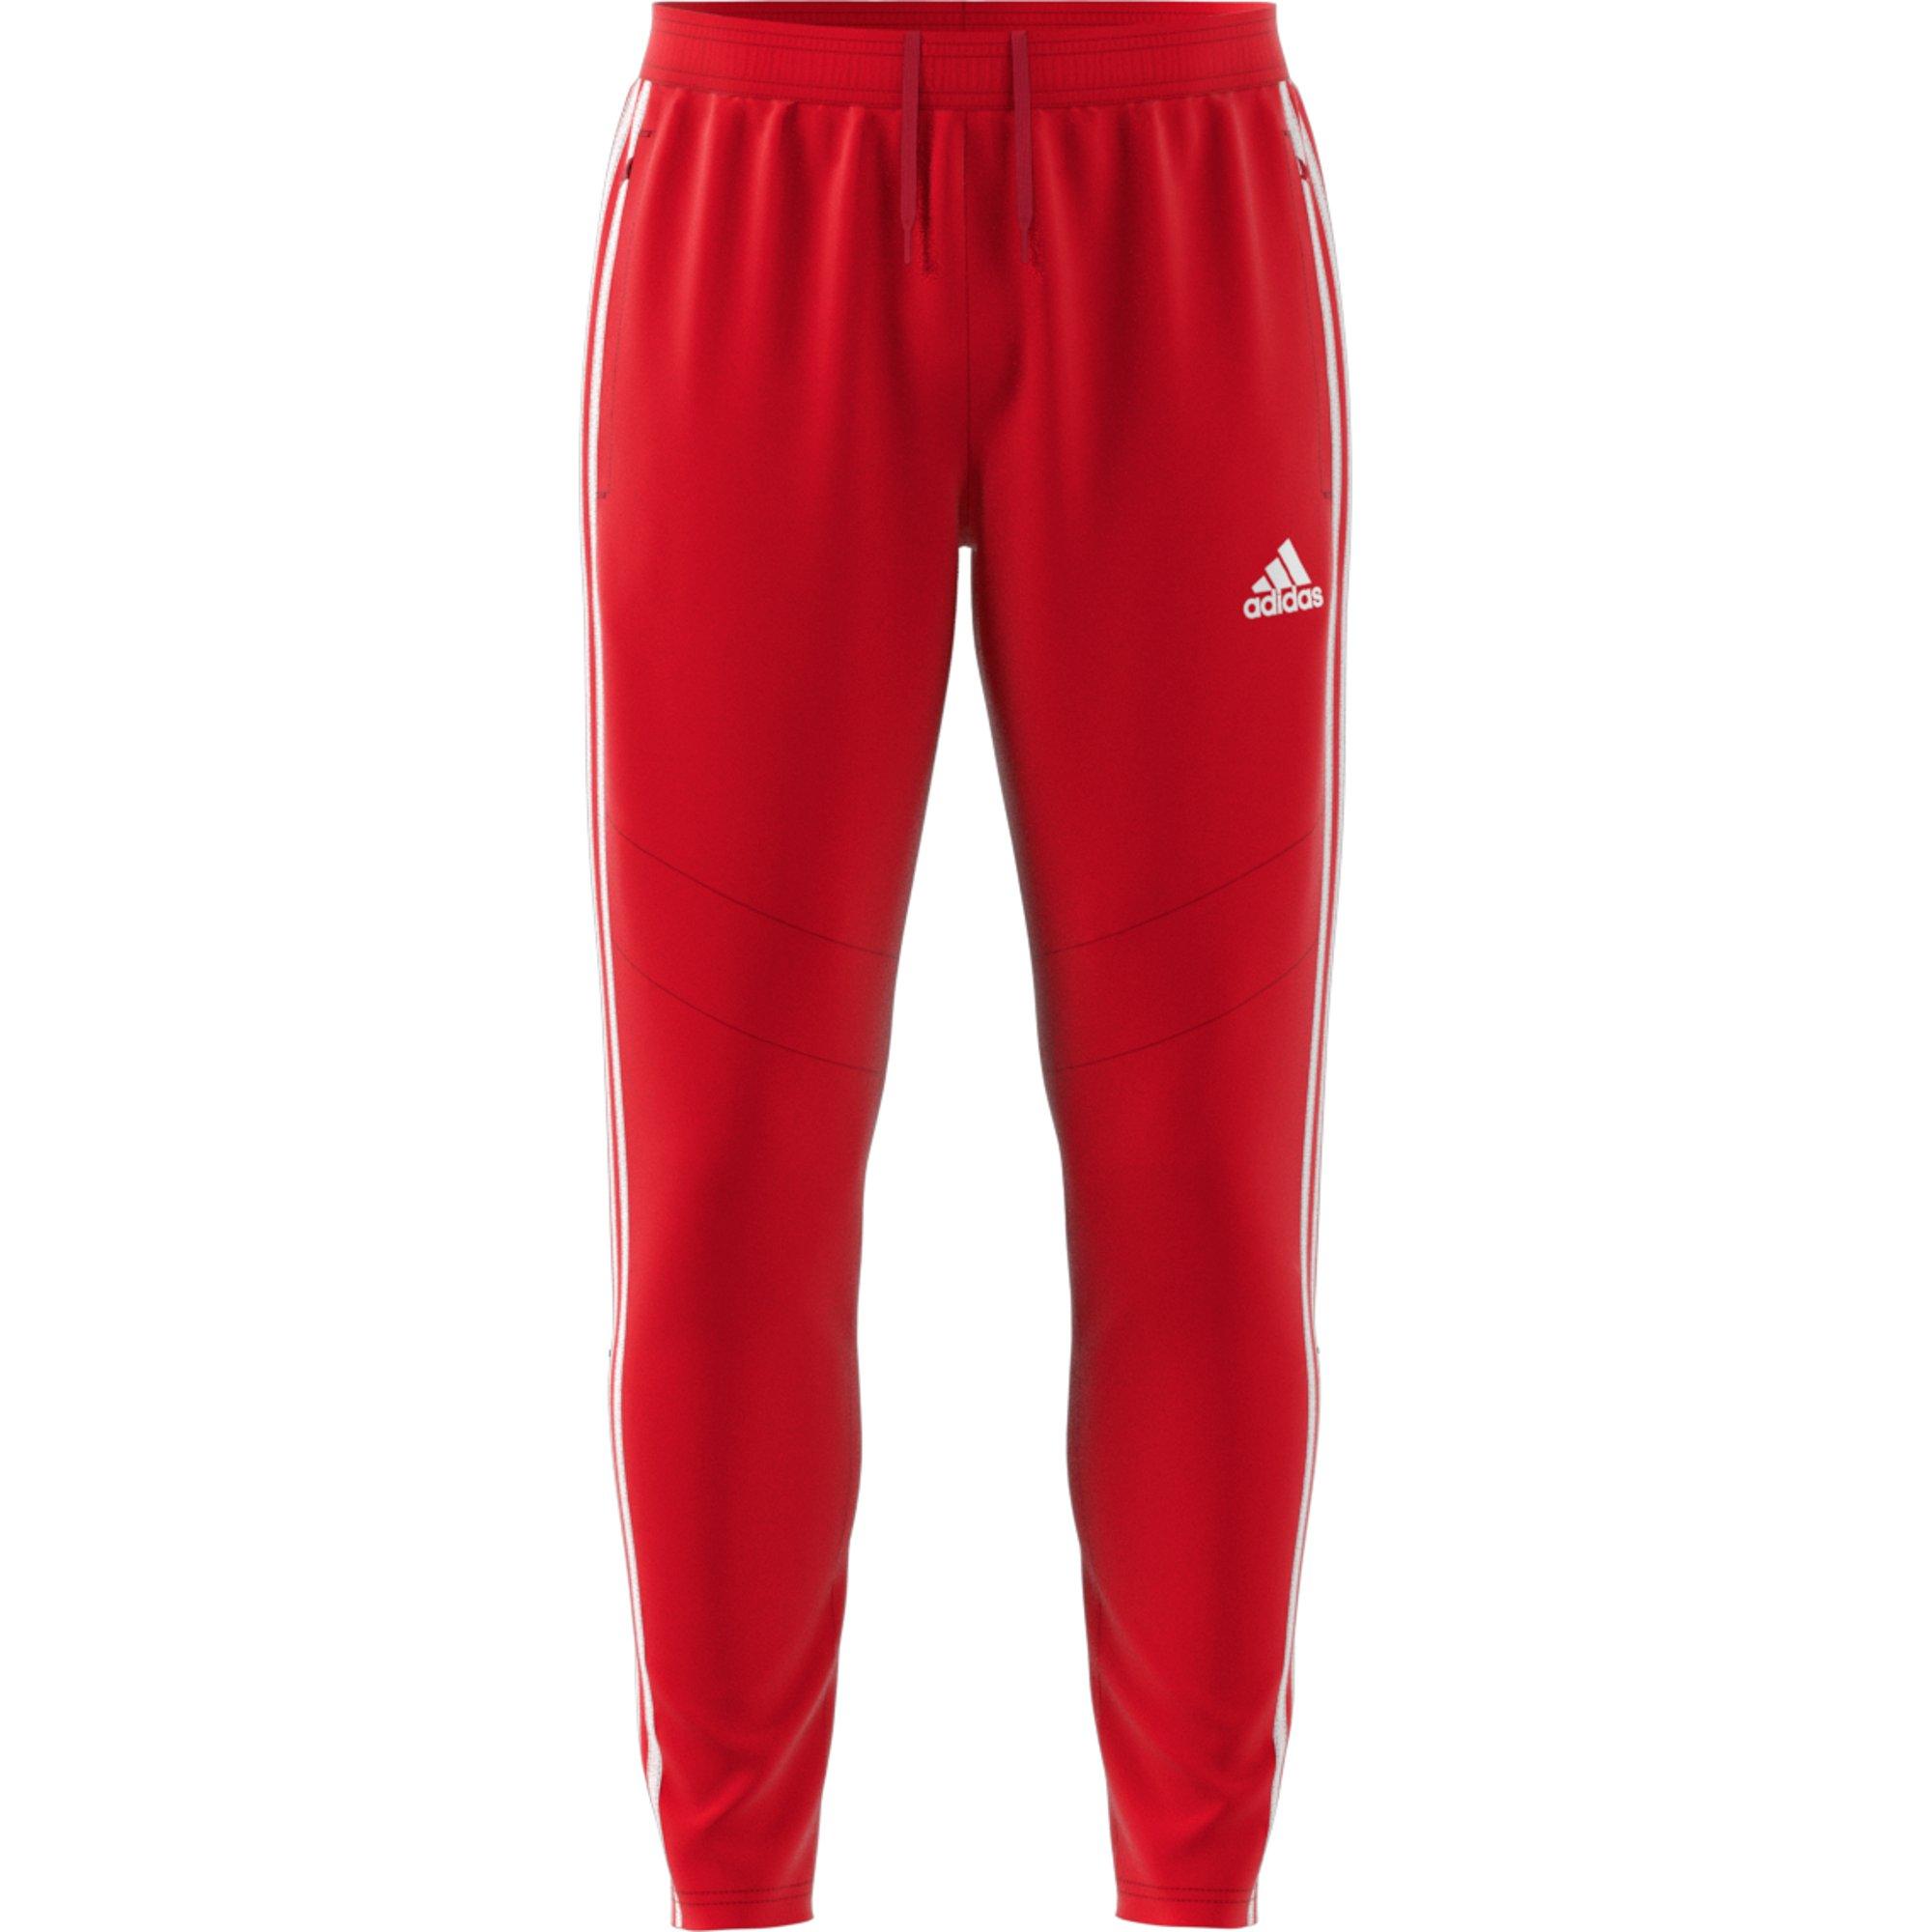 adidas pants red and white